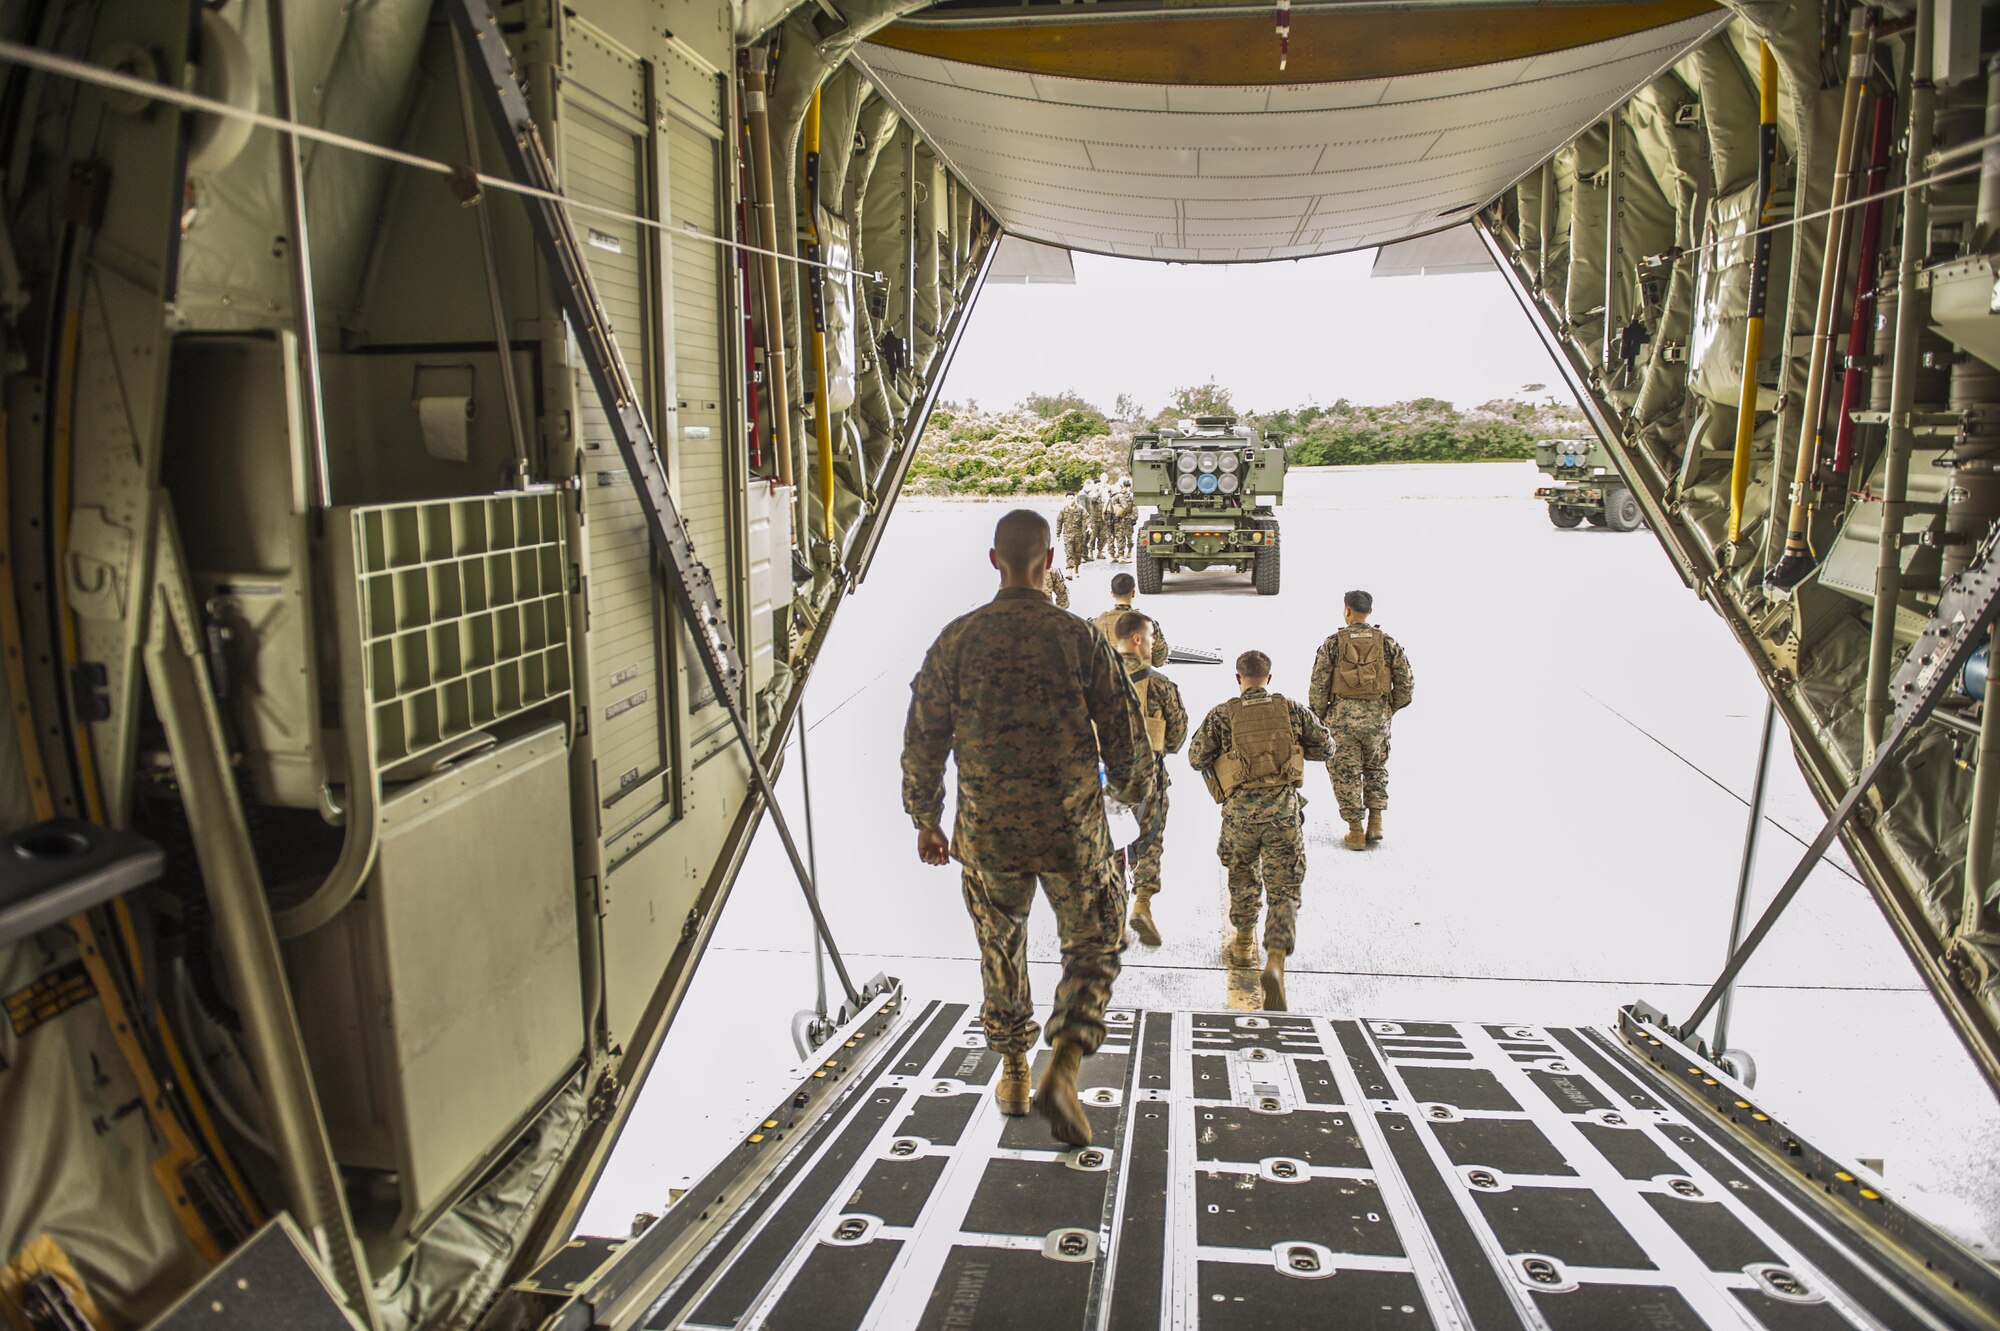 U.S. Marine Corps Marines with the 5th Battalion, 11th Marines, exit a C-130 Hercules after a briefing prior to training with 17th Special Operations Squadron Airmen on the flightline at Kadena Air Base, Japan, Jan. 23, 2017. Opportunities to train with members of other military branches allow for aircrew to learn about unfamiliar systems and types of operations. (U.S. Air Force photo by Airman 1st Class Nick Emerick/Released)